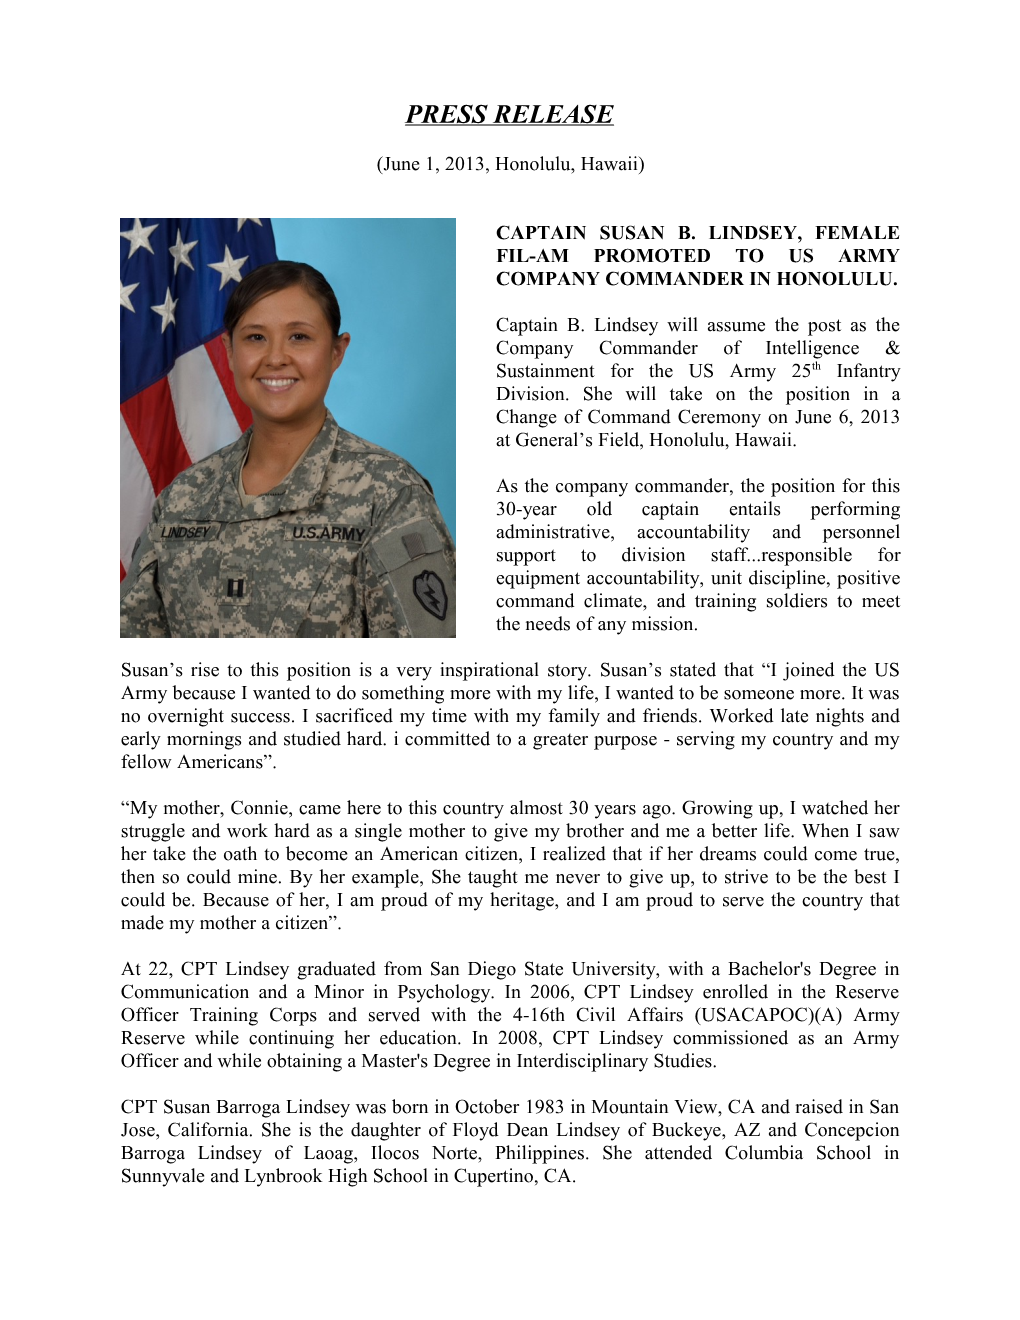 Captain Susan B. Lindsey, Female Fil-Am Promoted to Us Army Company Commander in Honolulu